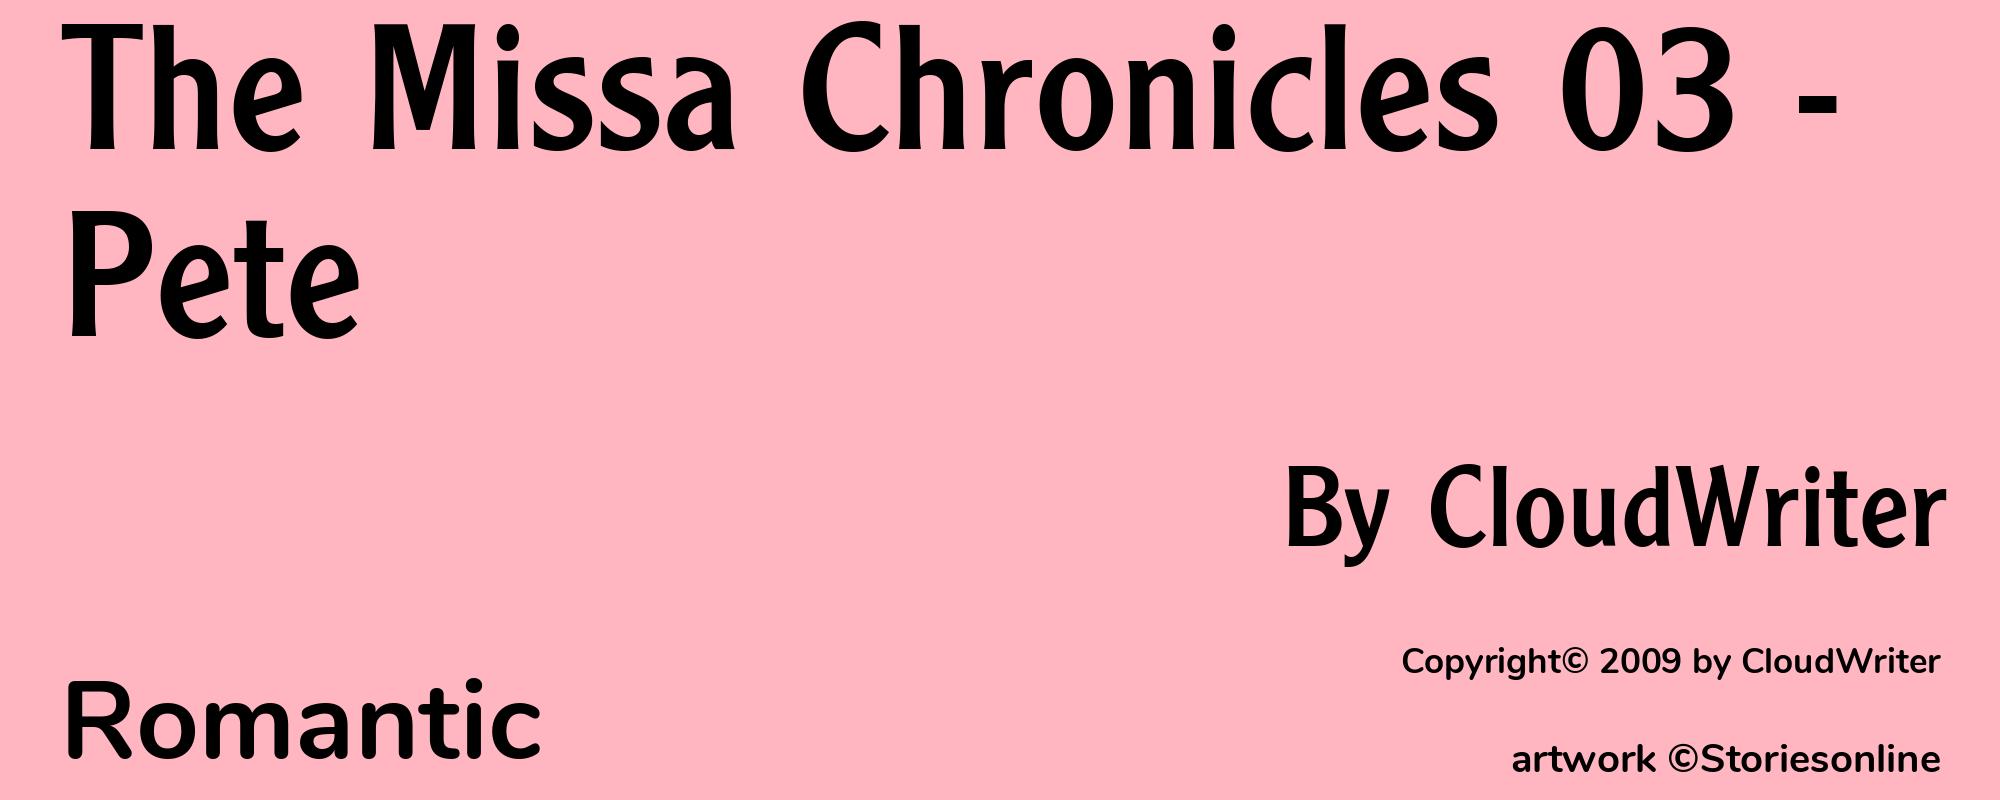 The Missa Chronicles 03 - Pete - Cover